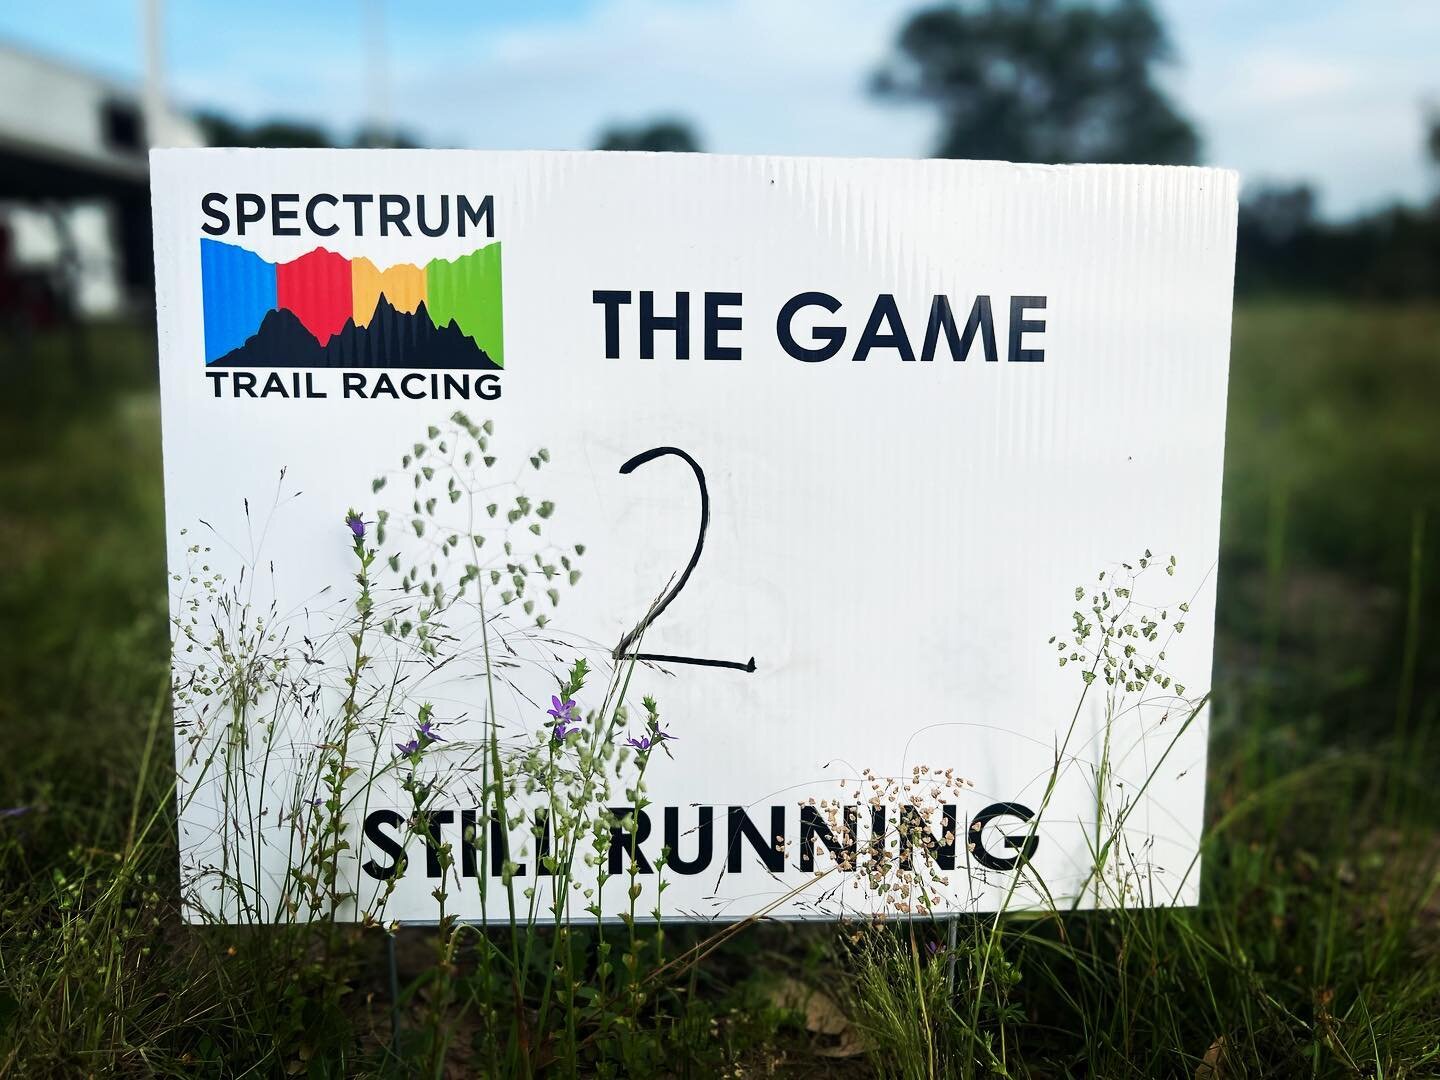 Only two runners left - LeAnn and Trevor! How long will they continue to battle it out? 12 total yards? 15?&hellip;

They&rsquo;ve already run over 41 miles. How much further are they willing to go to be the last person standing?

#thegame #spectrumt